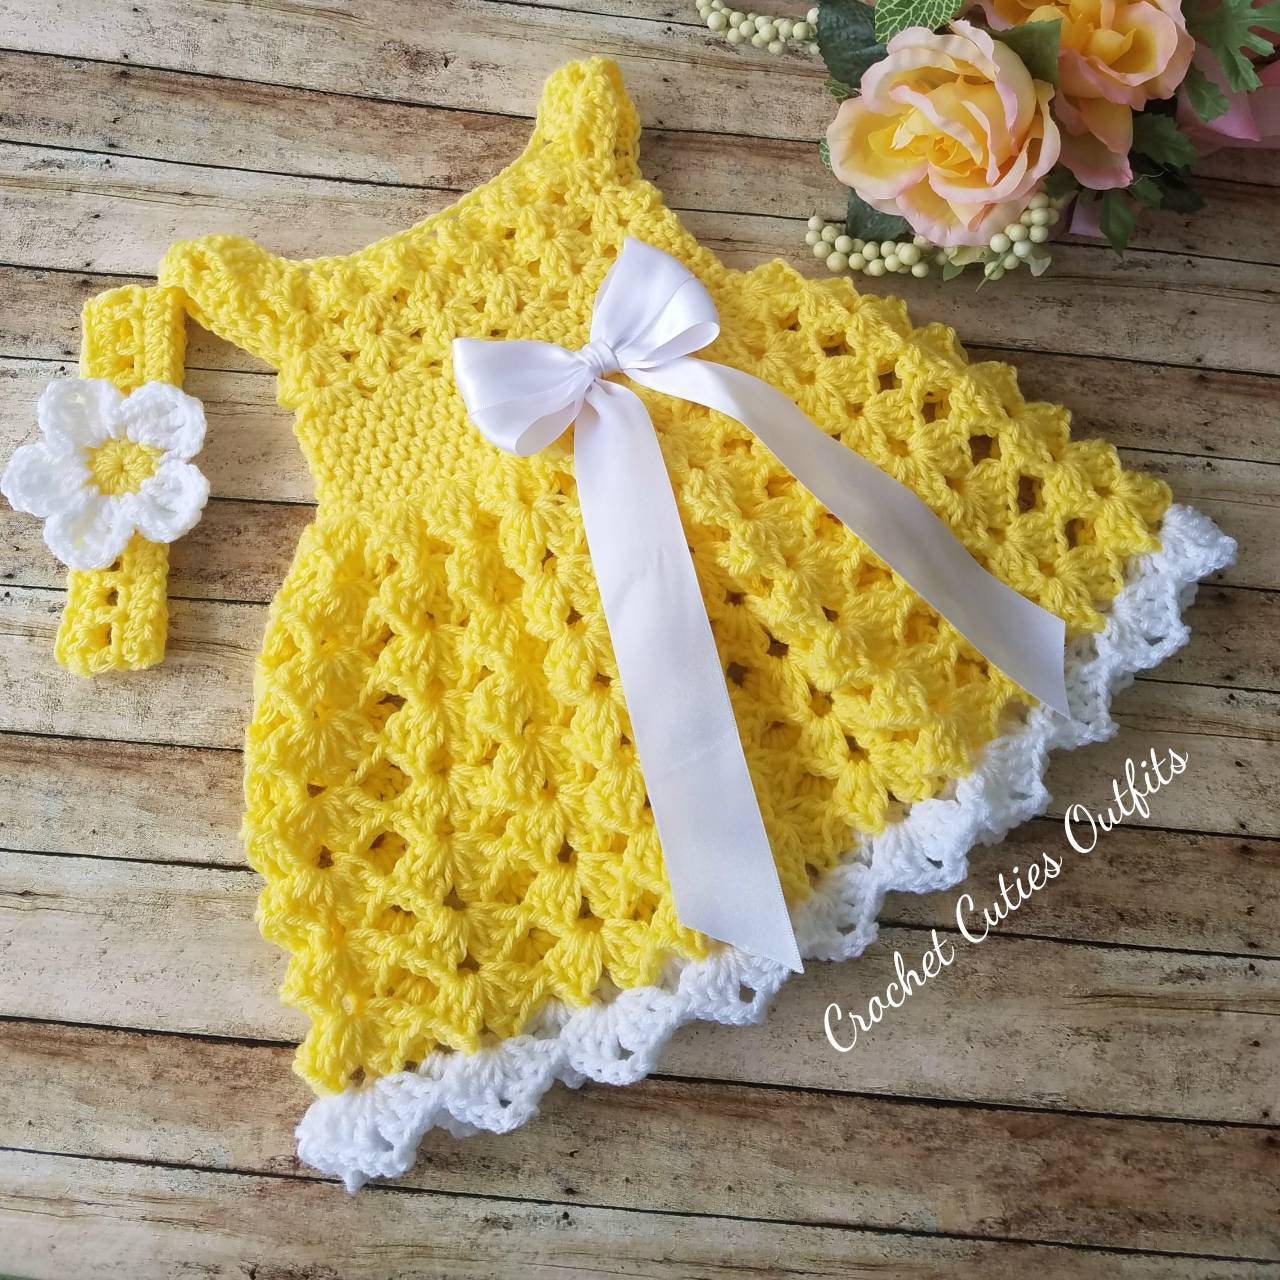 Crochet Baby Dress, Yellow Baby Outfit, Baby Shower Gift, Infant Girl Dress, Long Gown